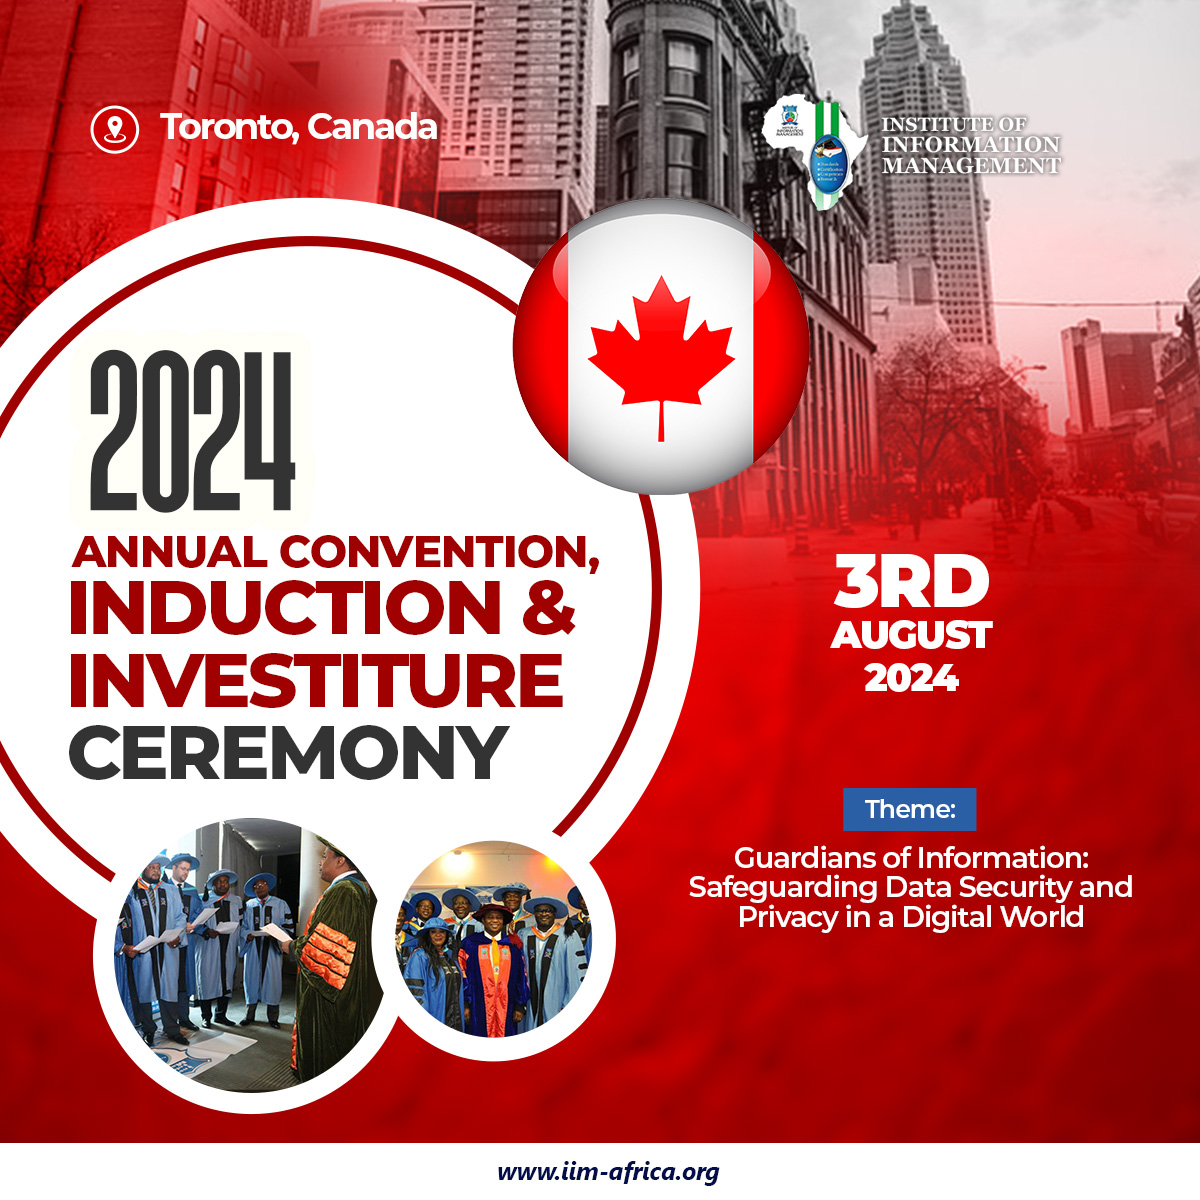 2023 Canada Annual Convention, Induction & Investiture